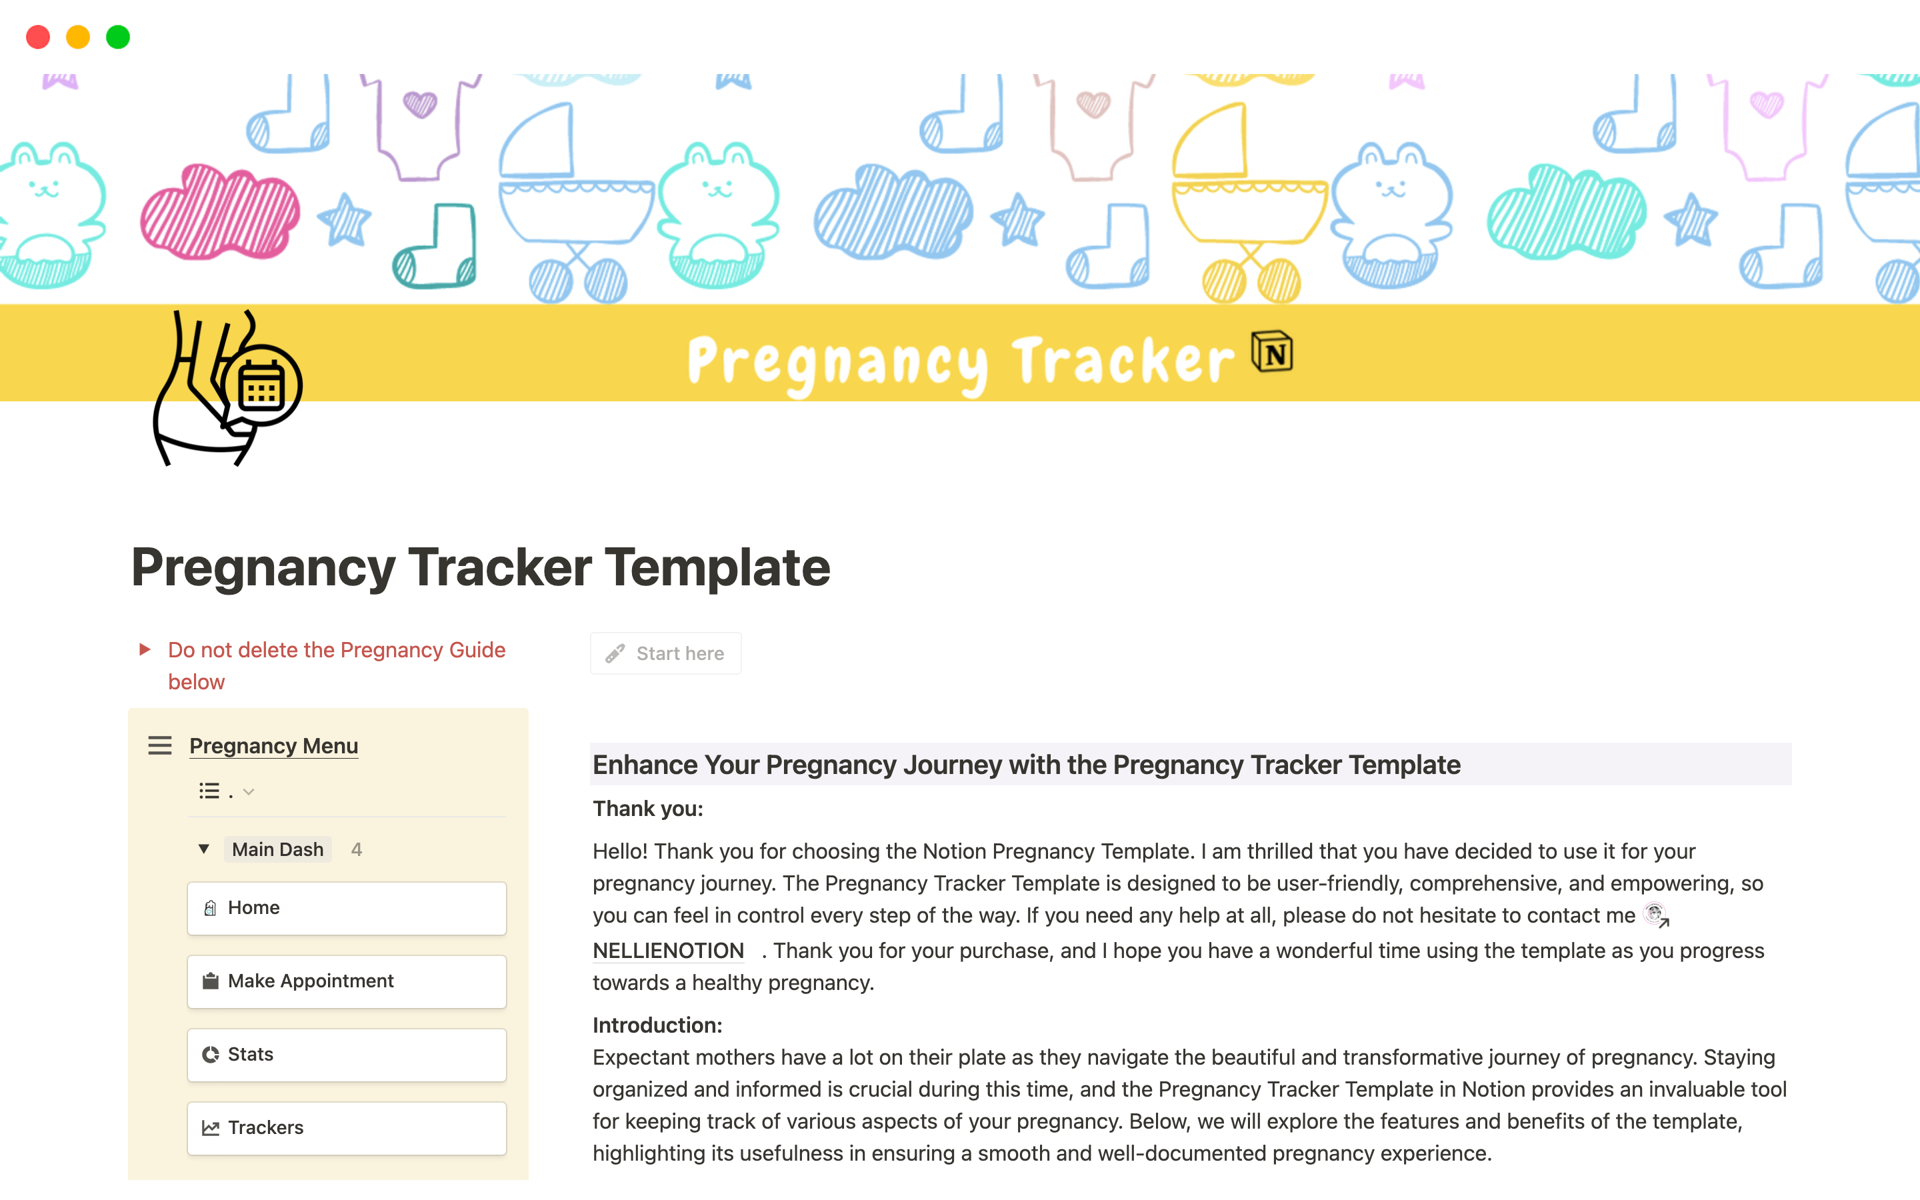 The Pregnancy Tracker Template is a comprehensive and user-friendly tool that empowers expectant mothers to navigate their pregnancy journey with ease, offering features such as week-by-week tracking, health monitoring, project planning, and budgeting.